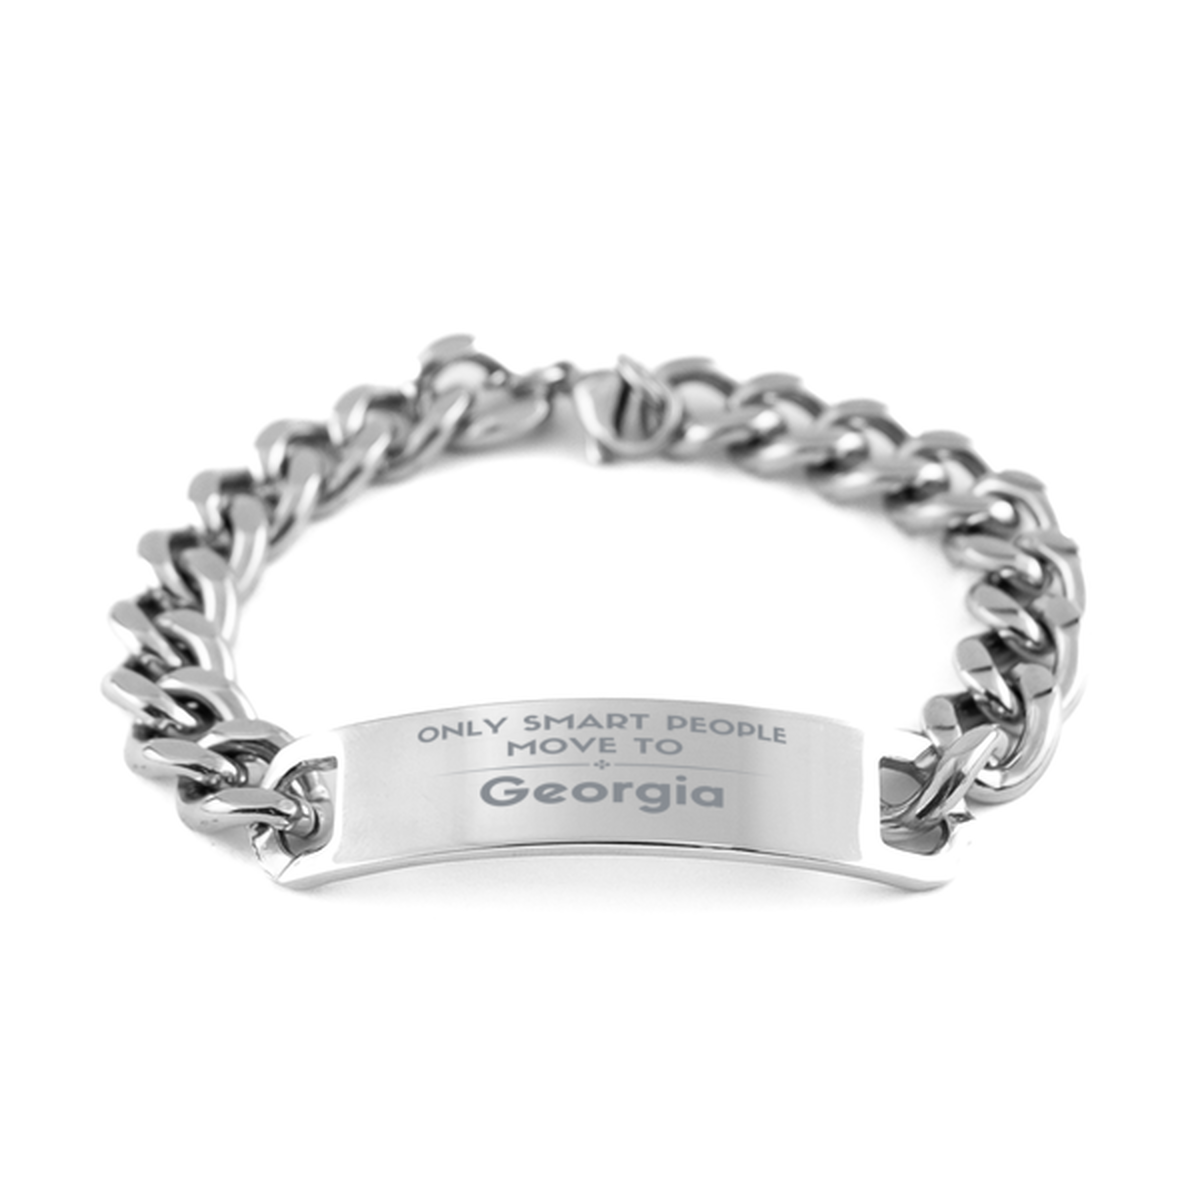 Only smart people move to Georgia Cuban Chain Stainless Steel Bracelet, Gag Gifts For Georgia, Move to Georgia Gifts for Friends Coworker Funny Saying Quote